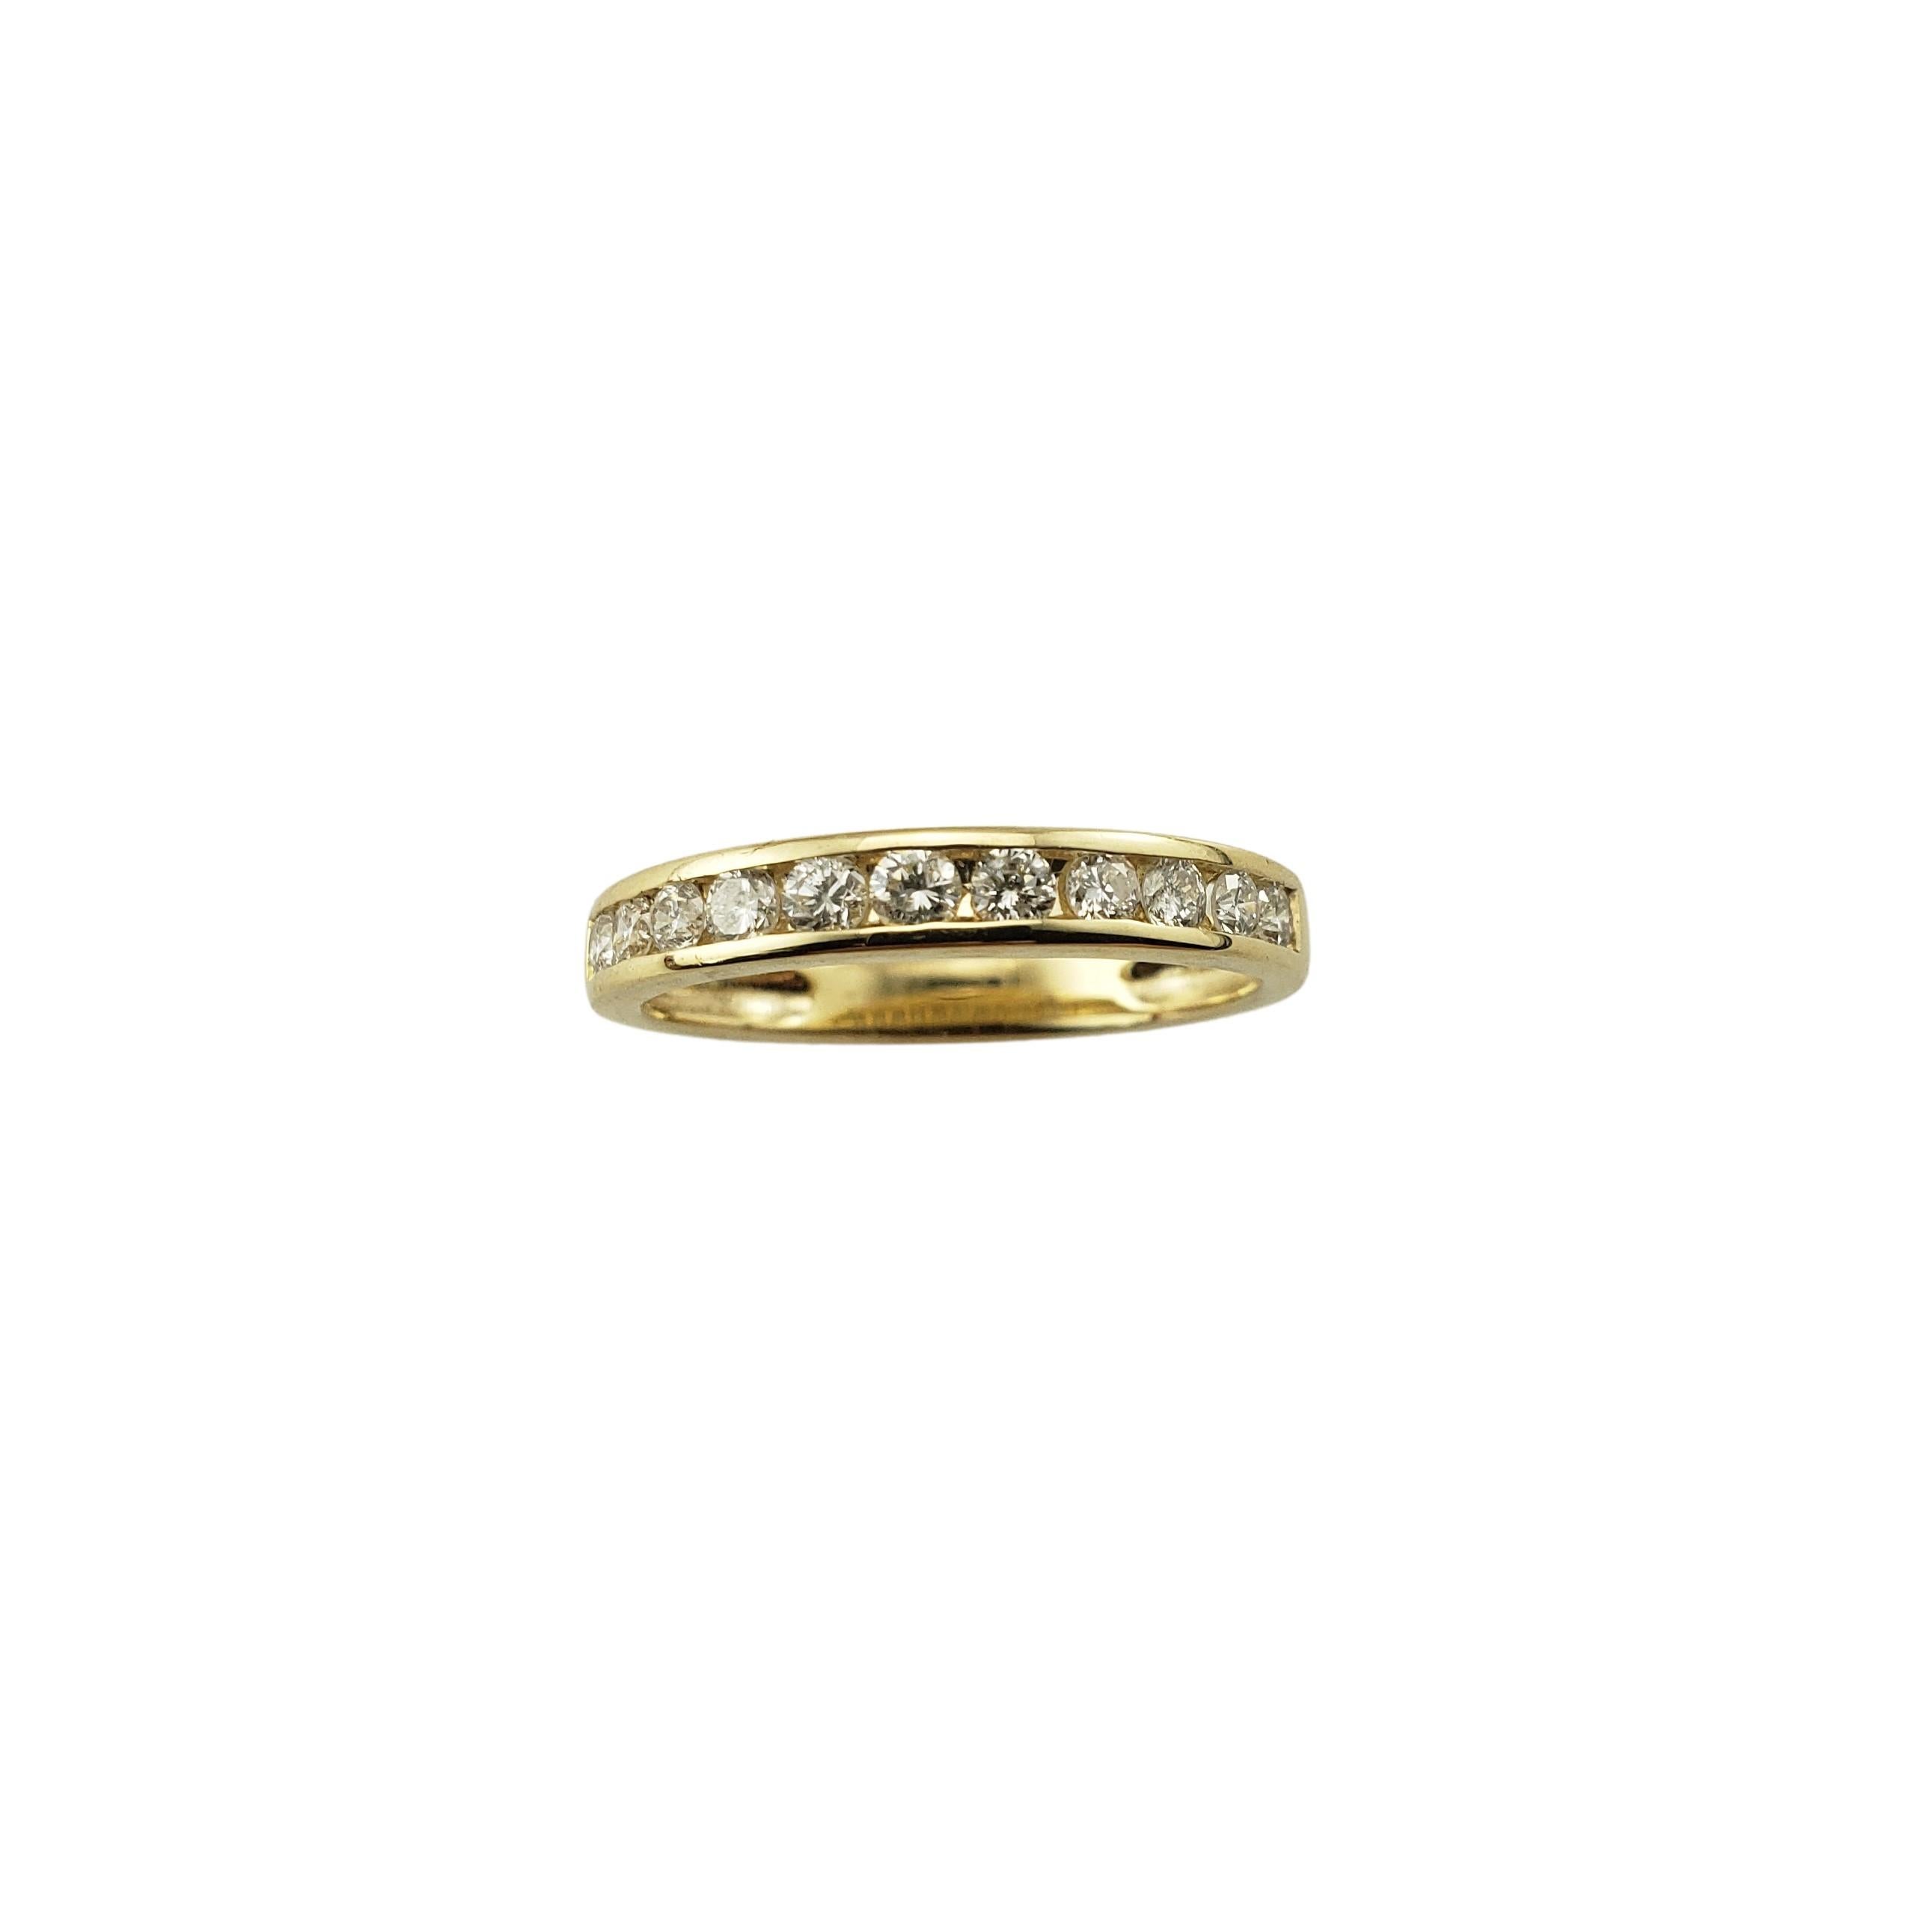 14 Karat Yellow Gold and Diamond Wedding/Anniversary Band Ring Size 8.75-

This sparkling band features 11 round brilliant cut diamonds set in classic 14K yellow gold.  Width:  3 mm.  

Approximate total diamond weight:  .44 ct.

Diamond color: